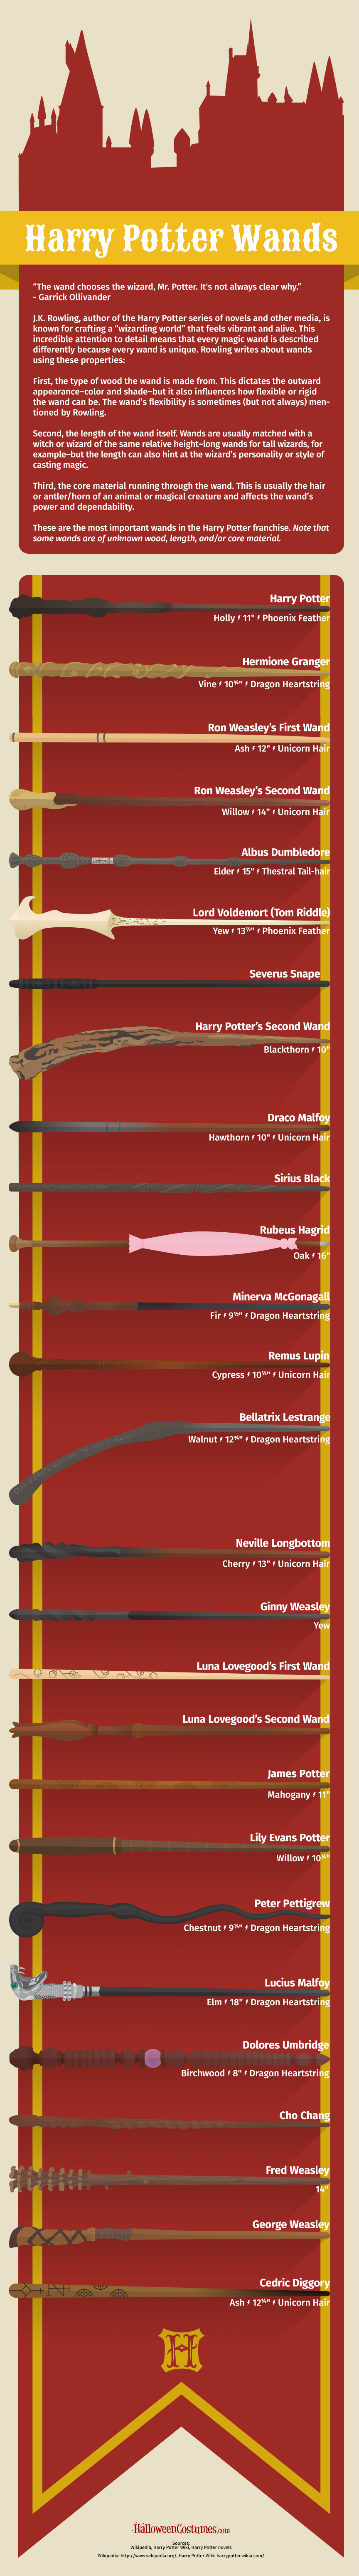 Harry Potter Wands [Infographic]  Blog